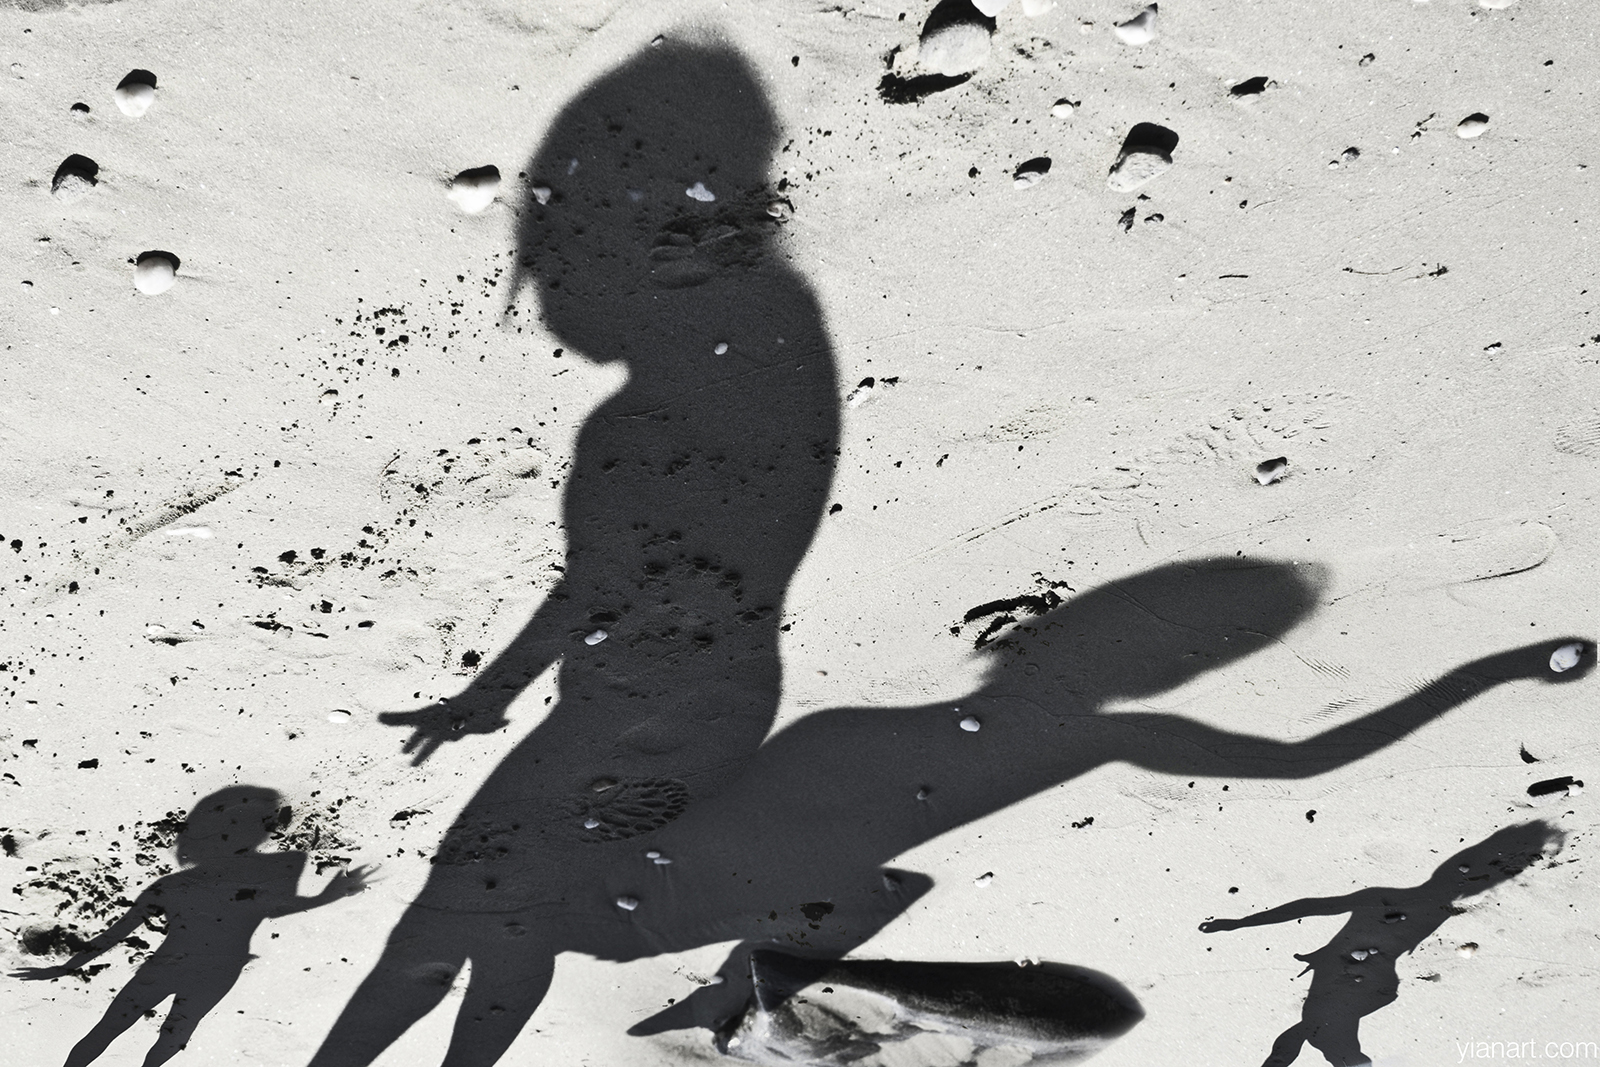 Shadows Photography Project in Black & White @ Tinos Island 2011